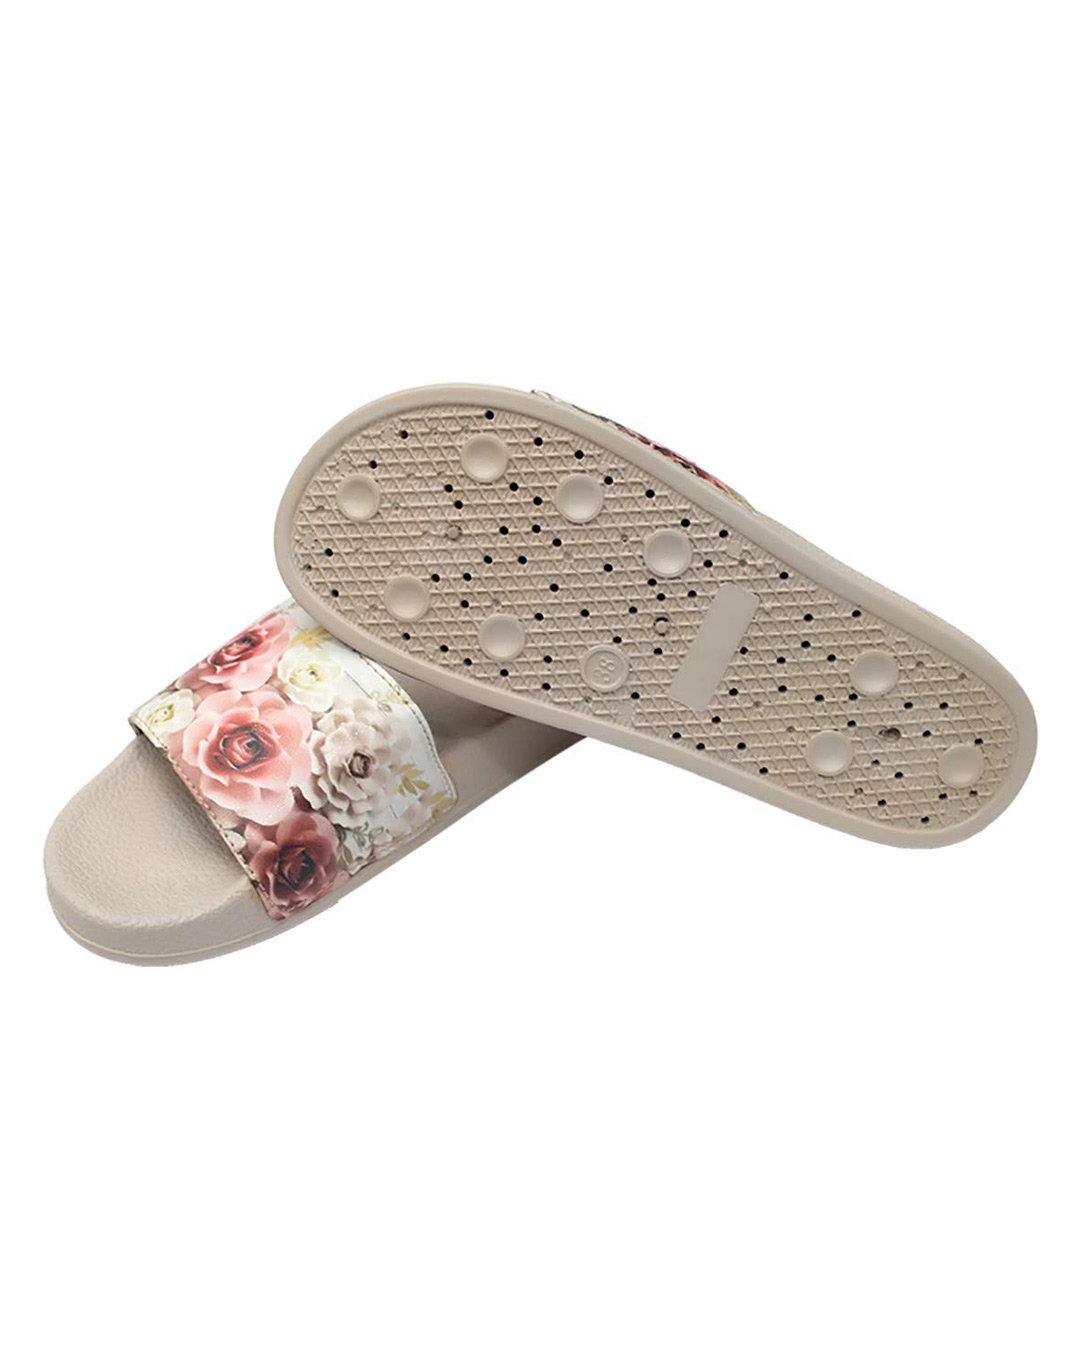 Shop FREECO Women's Slides Casual Daily Slippers Floral Print-Back